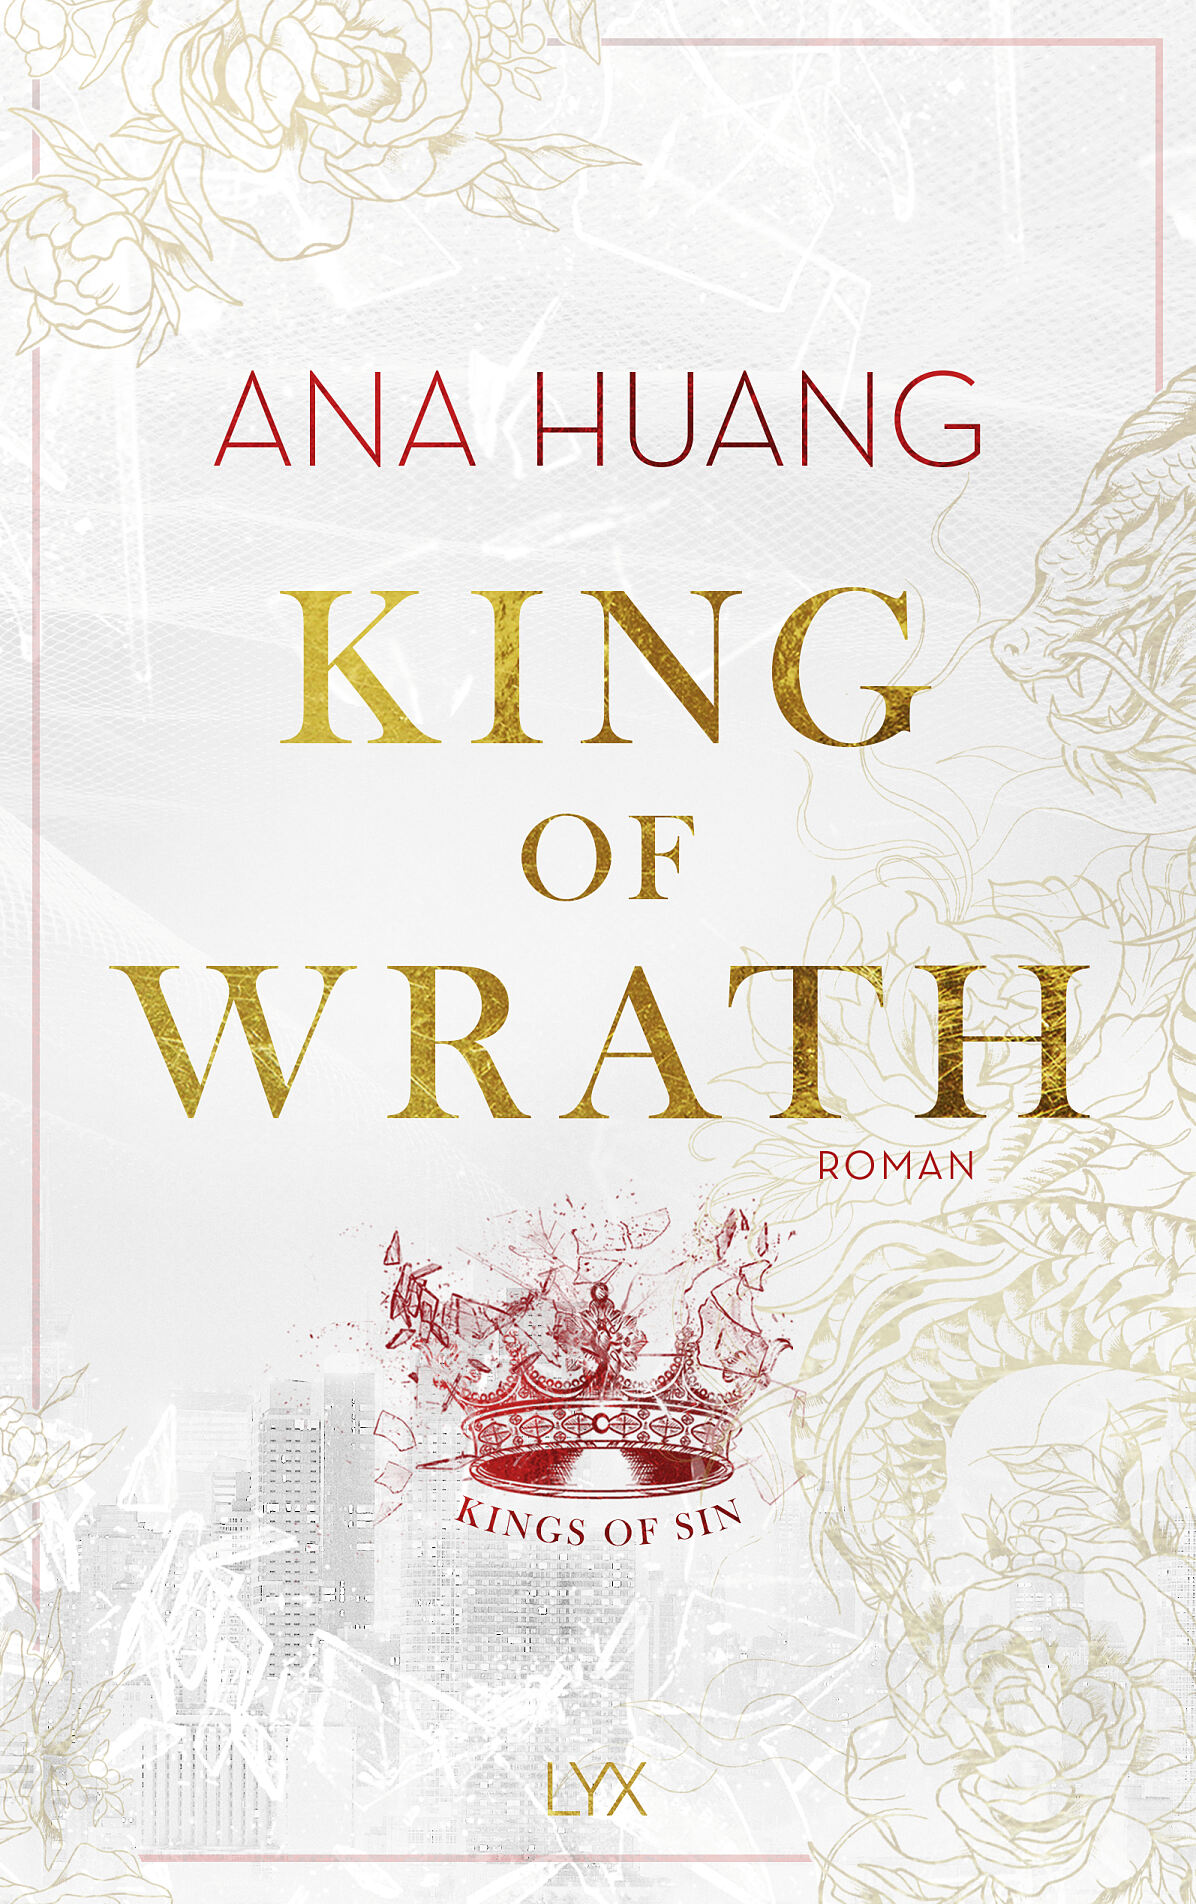 Huang A - King of Wrath